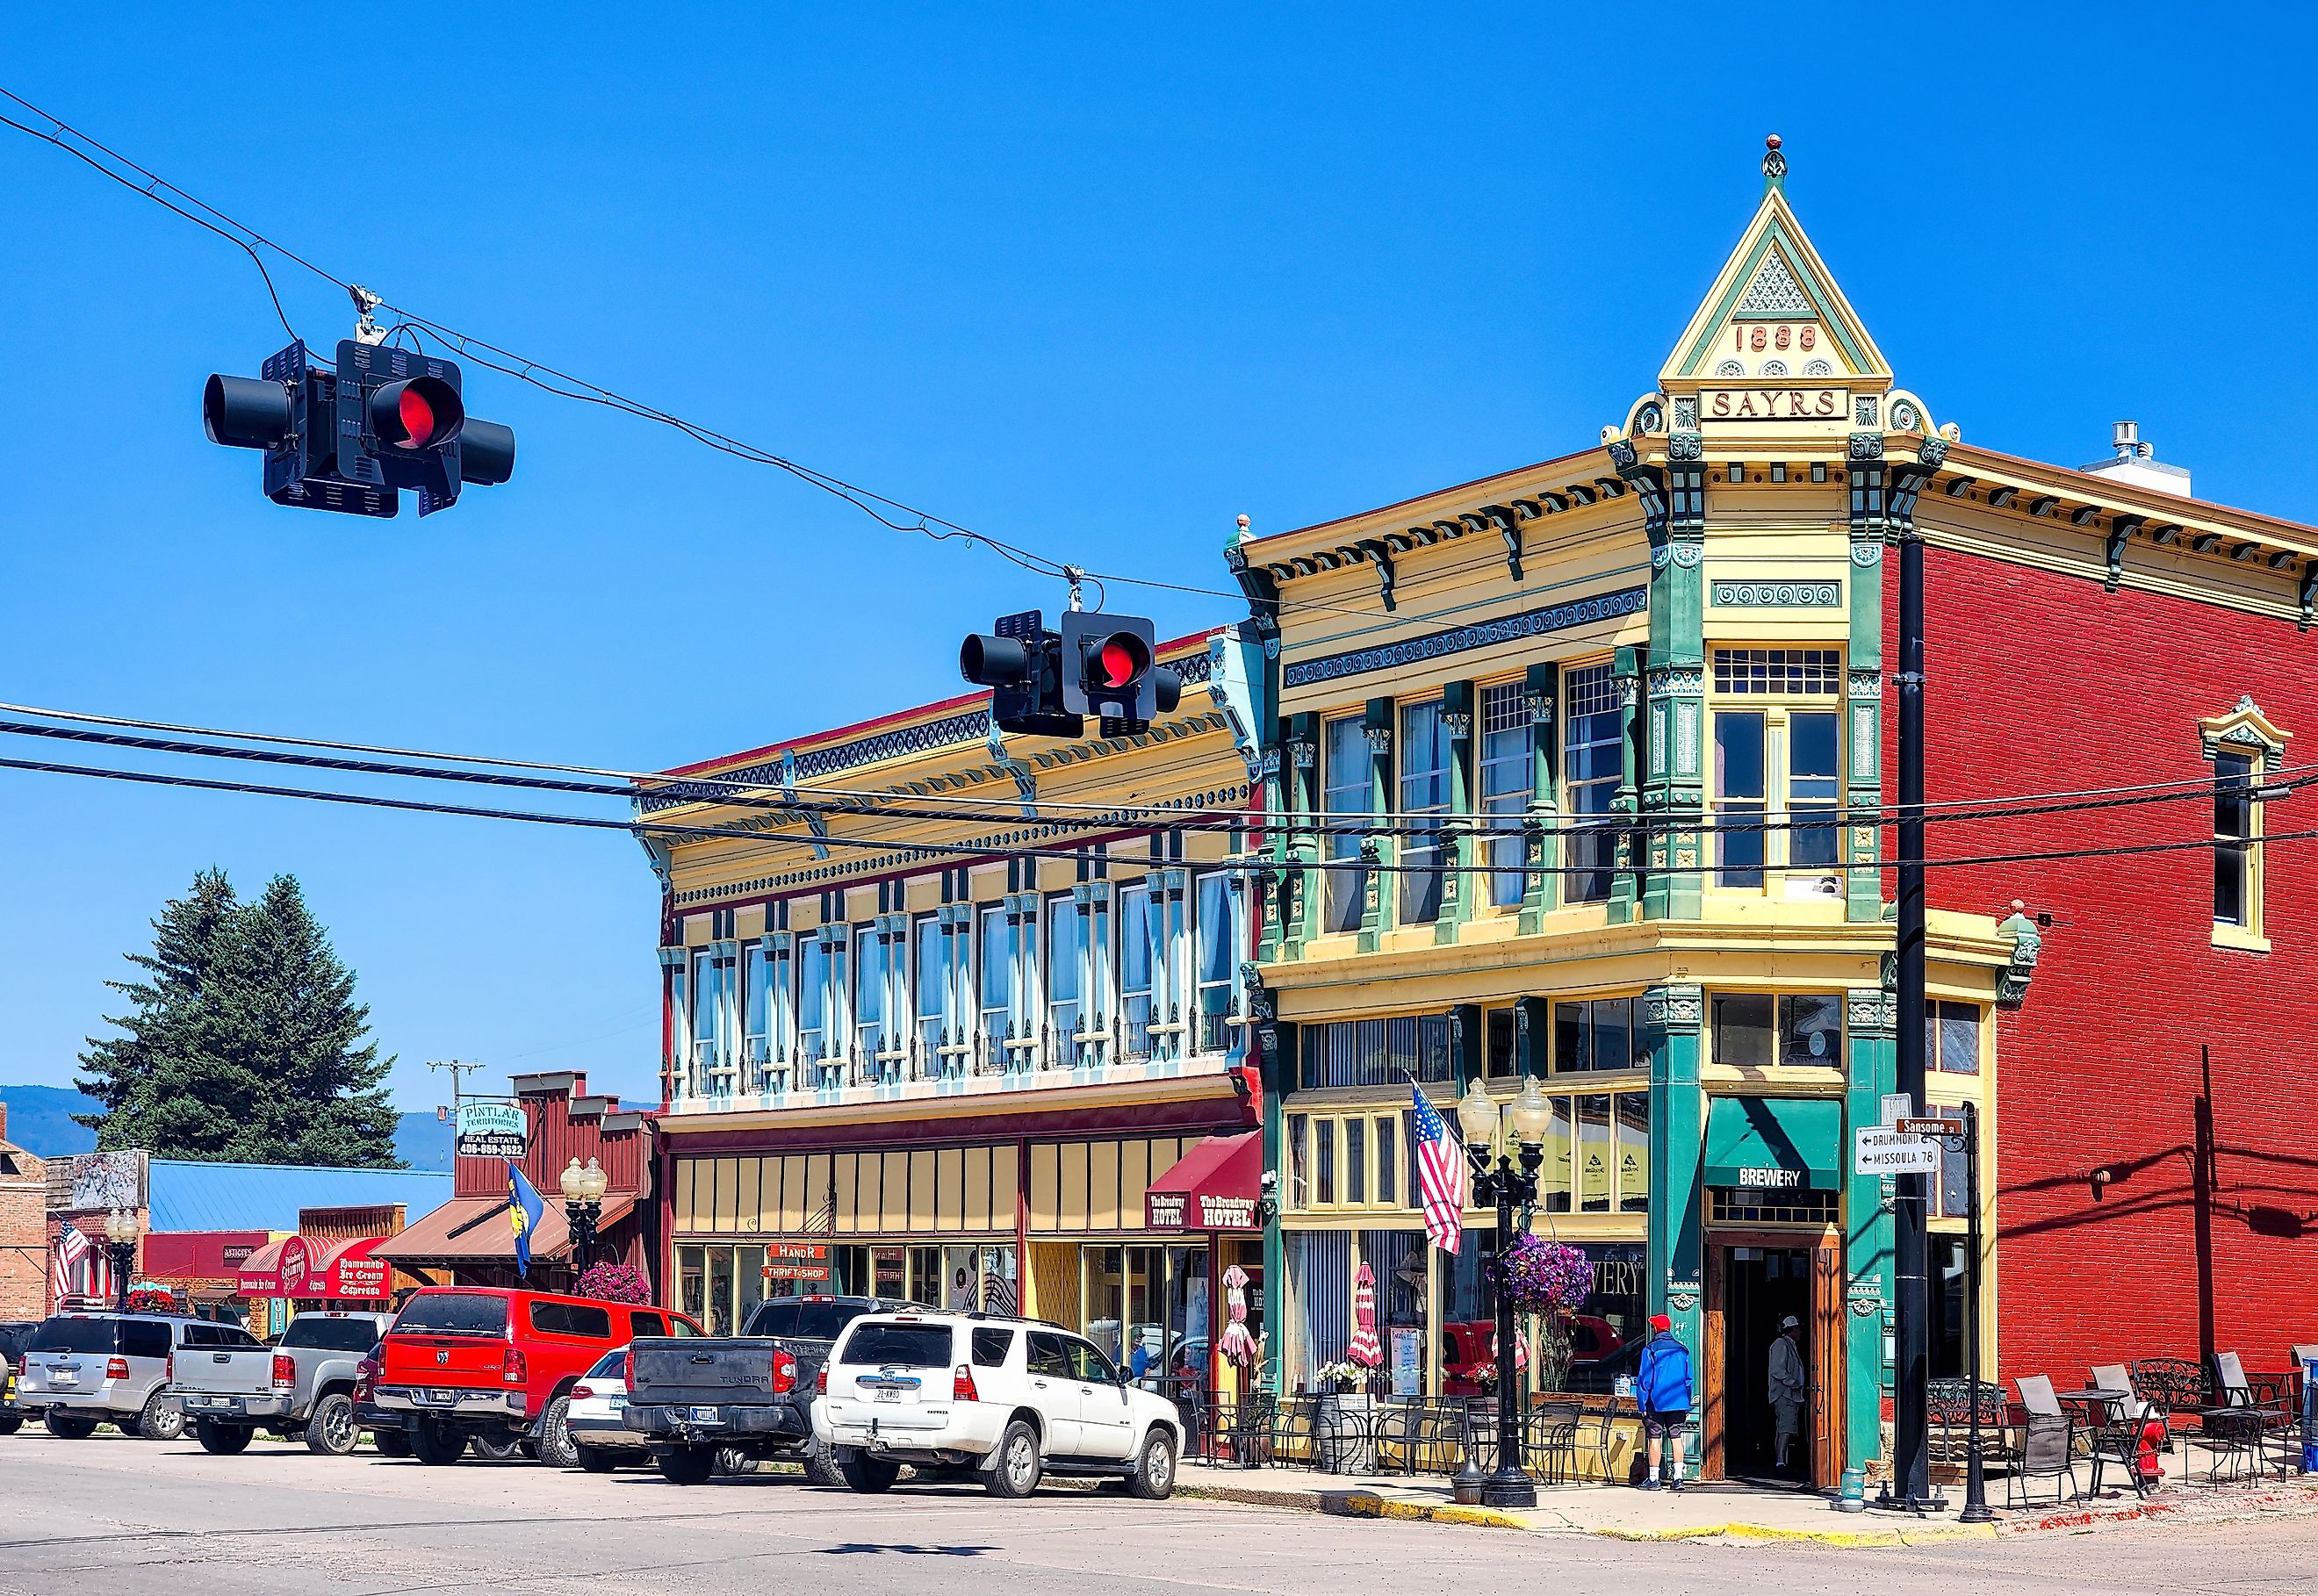 Philipsburg is a historic town in and the county seat of Granite County, Montana.